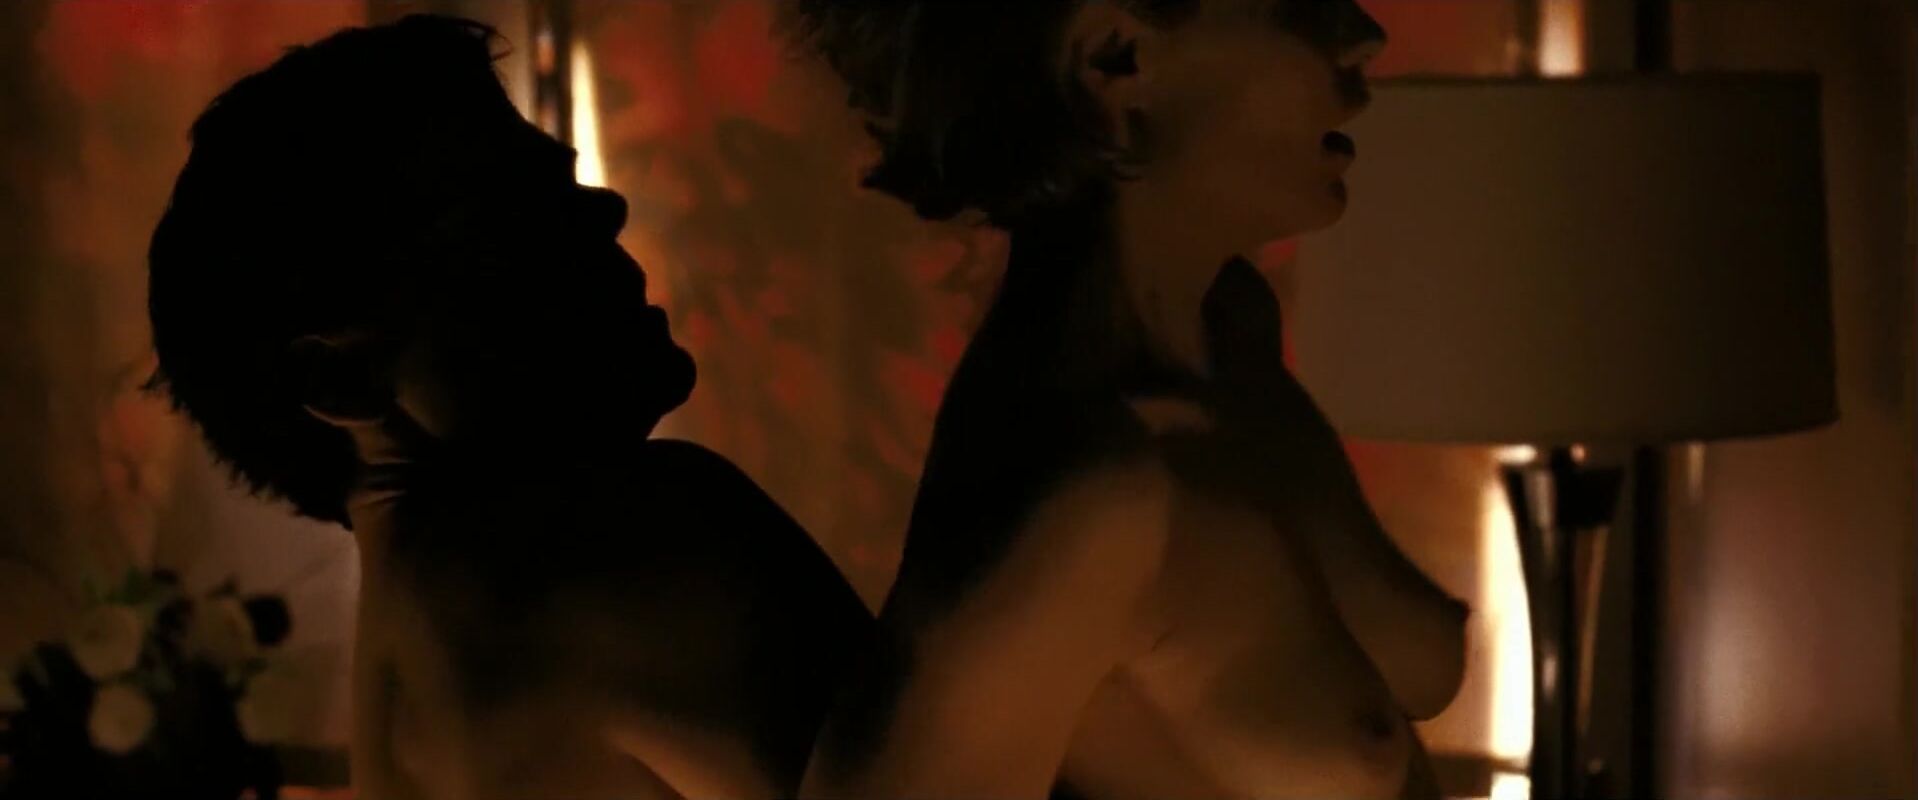 Passivo Feast of Love is story of Radha Mitchell and Alexa Davalos nude being banged many times Chicks - 2